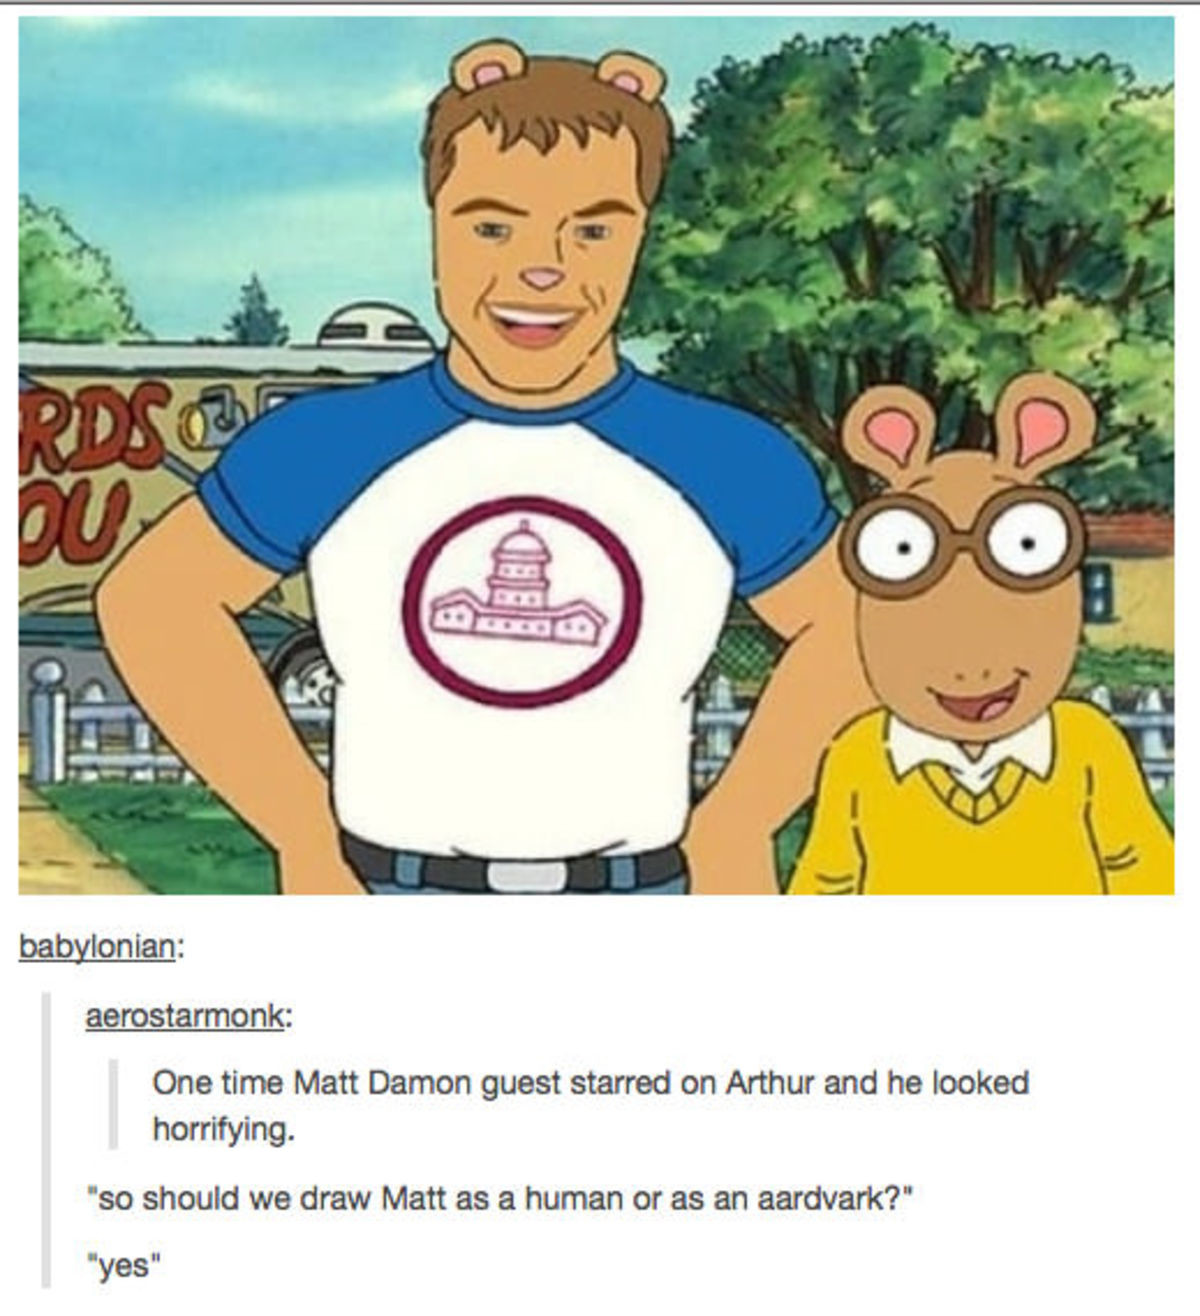 Horrifying. . one time Matt Damon guest starred on Arthur and ' looked horrifying. so should we draw Matt as ':,] human or as an aardvark?" was“